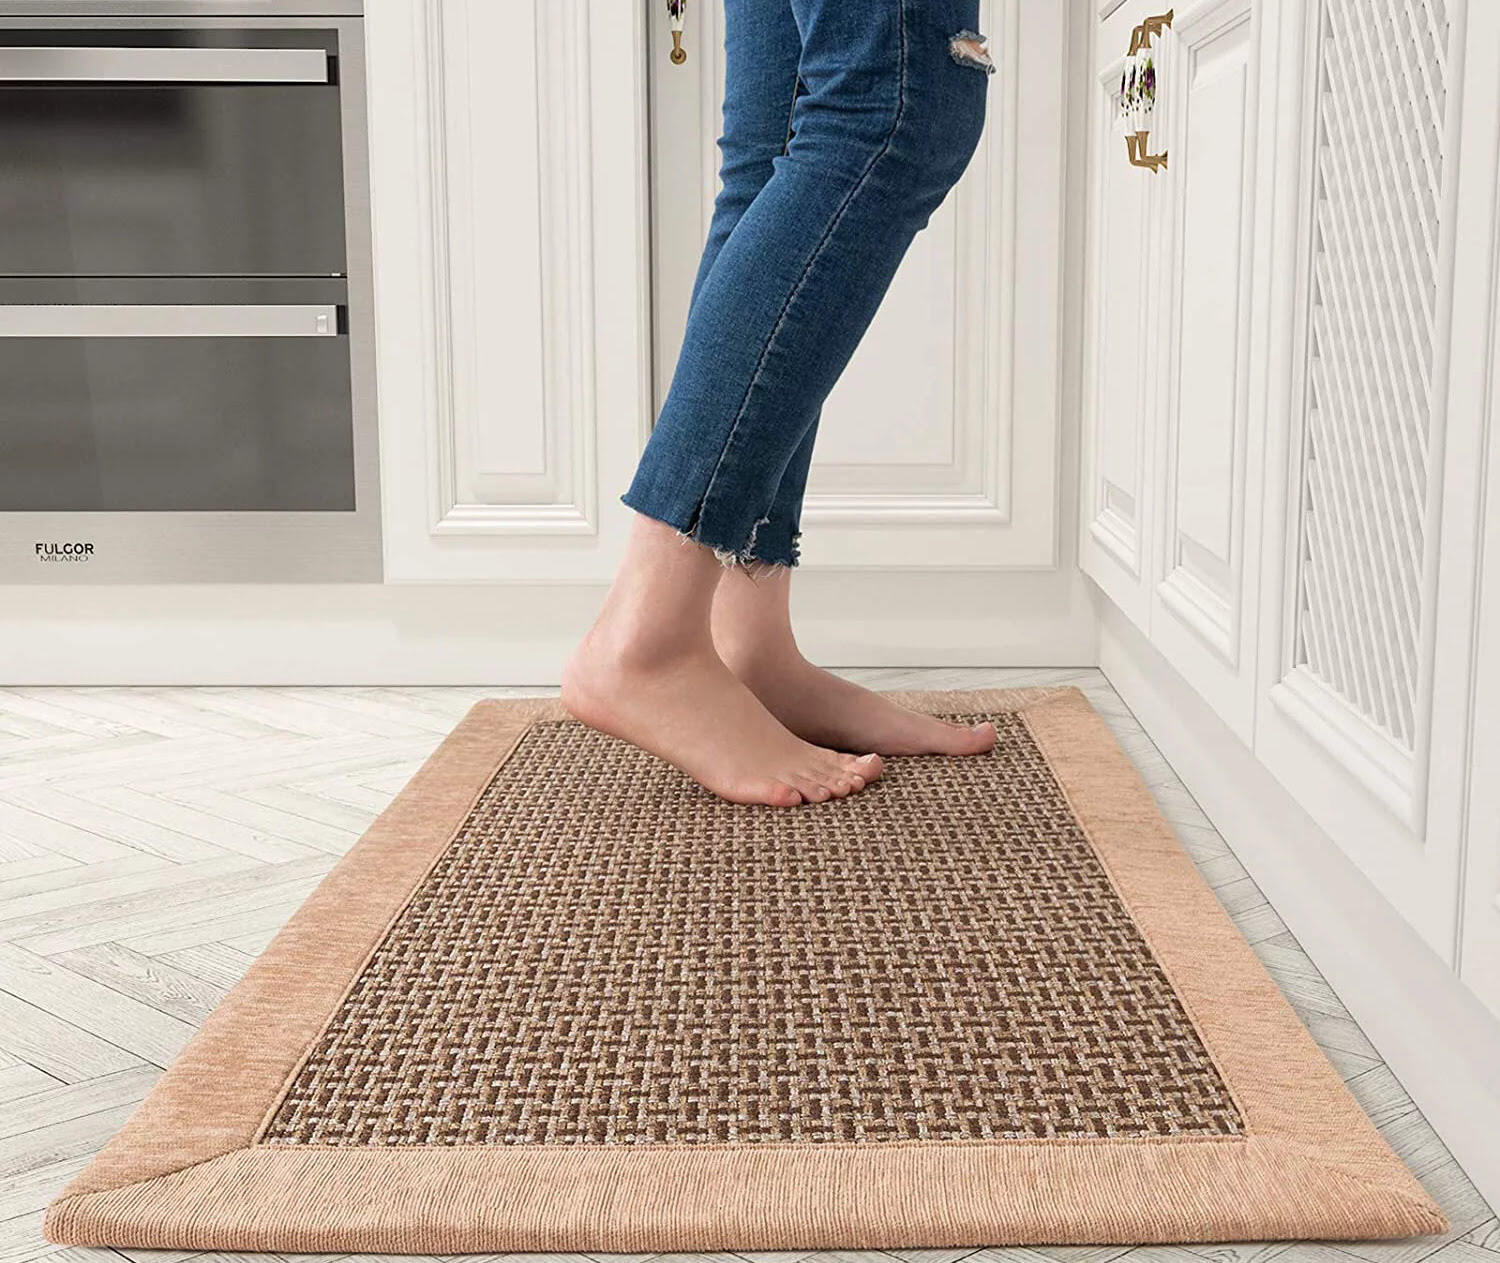 https://storables.com/wp-content/uploads/2023/10/9-amazing-kitchen-rugs-non-skid-washable-for-2023-1697452649.jpg